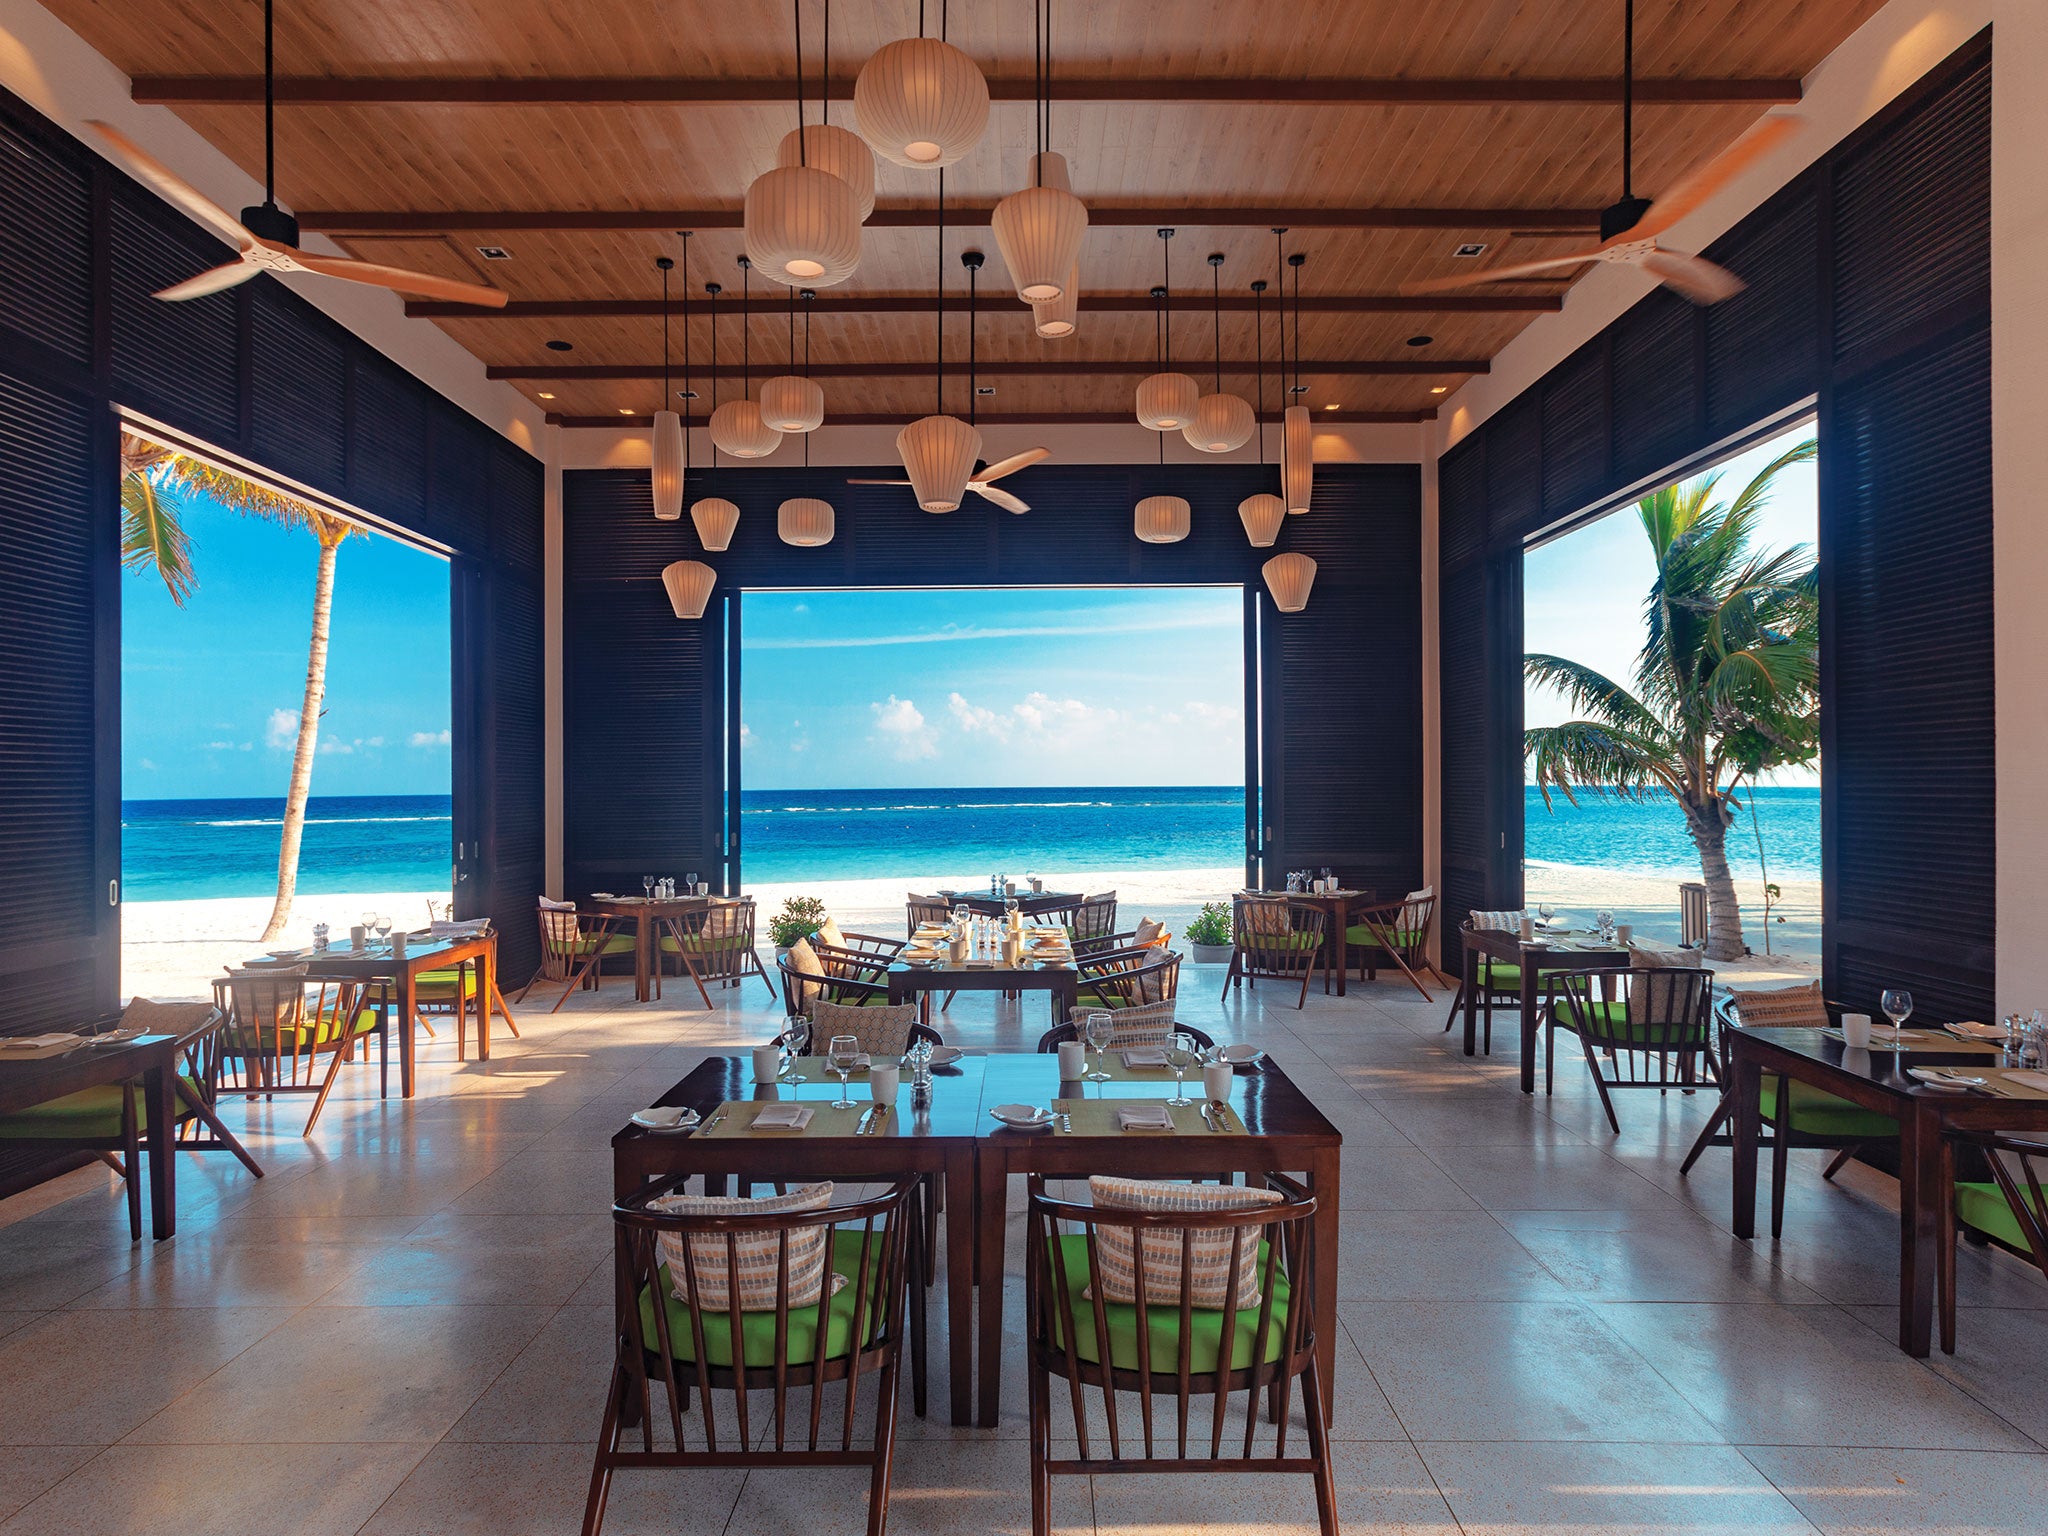 Dining at the Courtyard restaurant offers sea views